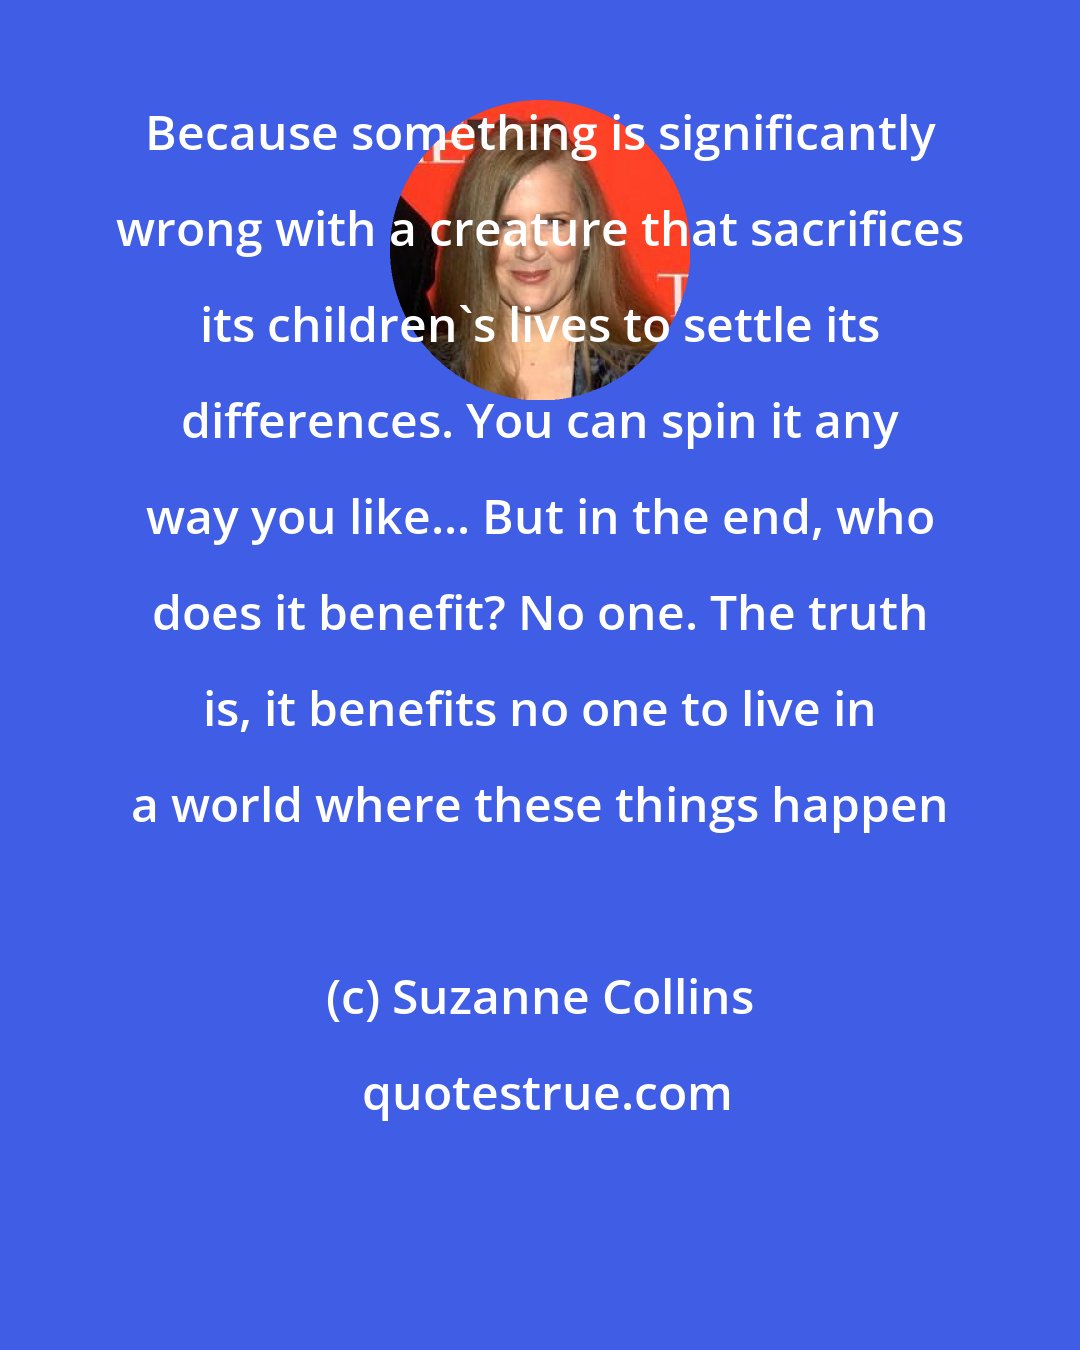 Suzanne Collins: Because something is significantly wrong with a creature that sacrifices its children's lives to settle its differences. You can spin it any way you like... But in the end, who does it benefit? No one. The truth is, it benefits no one to live in a world where these things happen